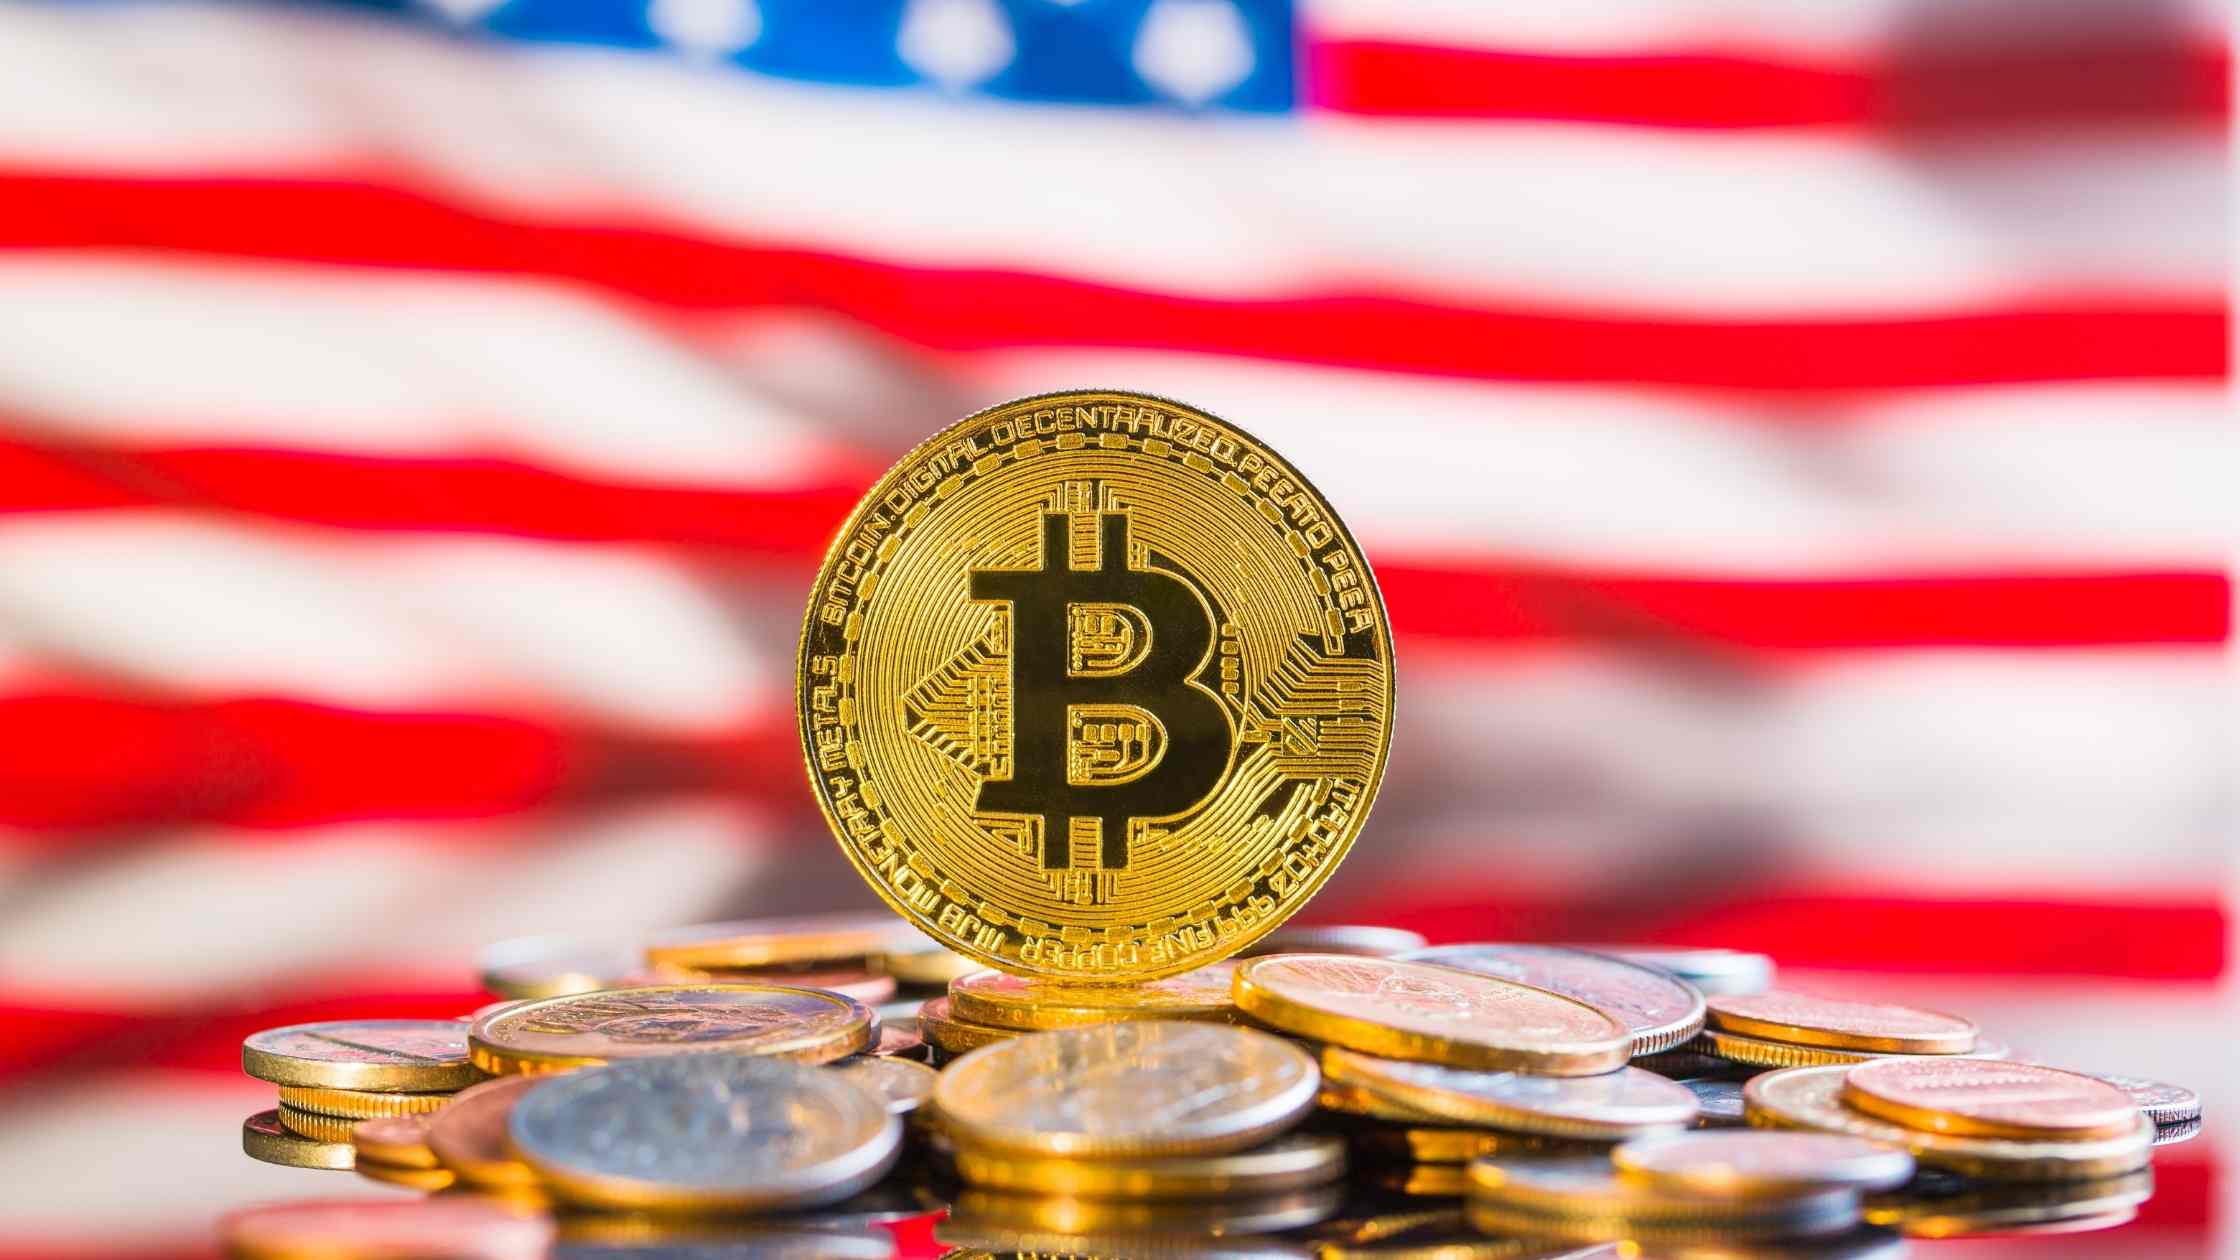 The US President Issues an Executive Order on Crypto